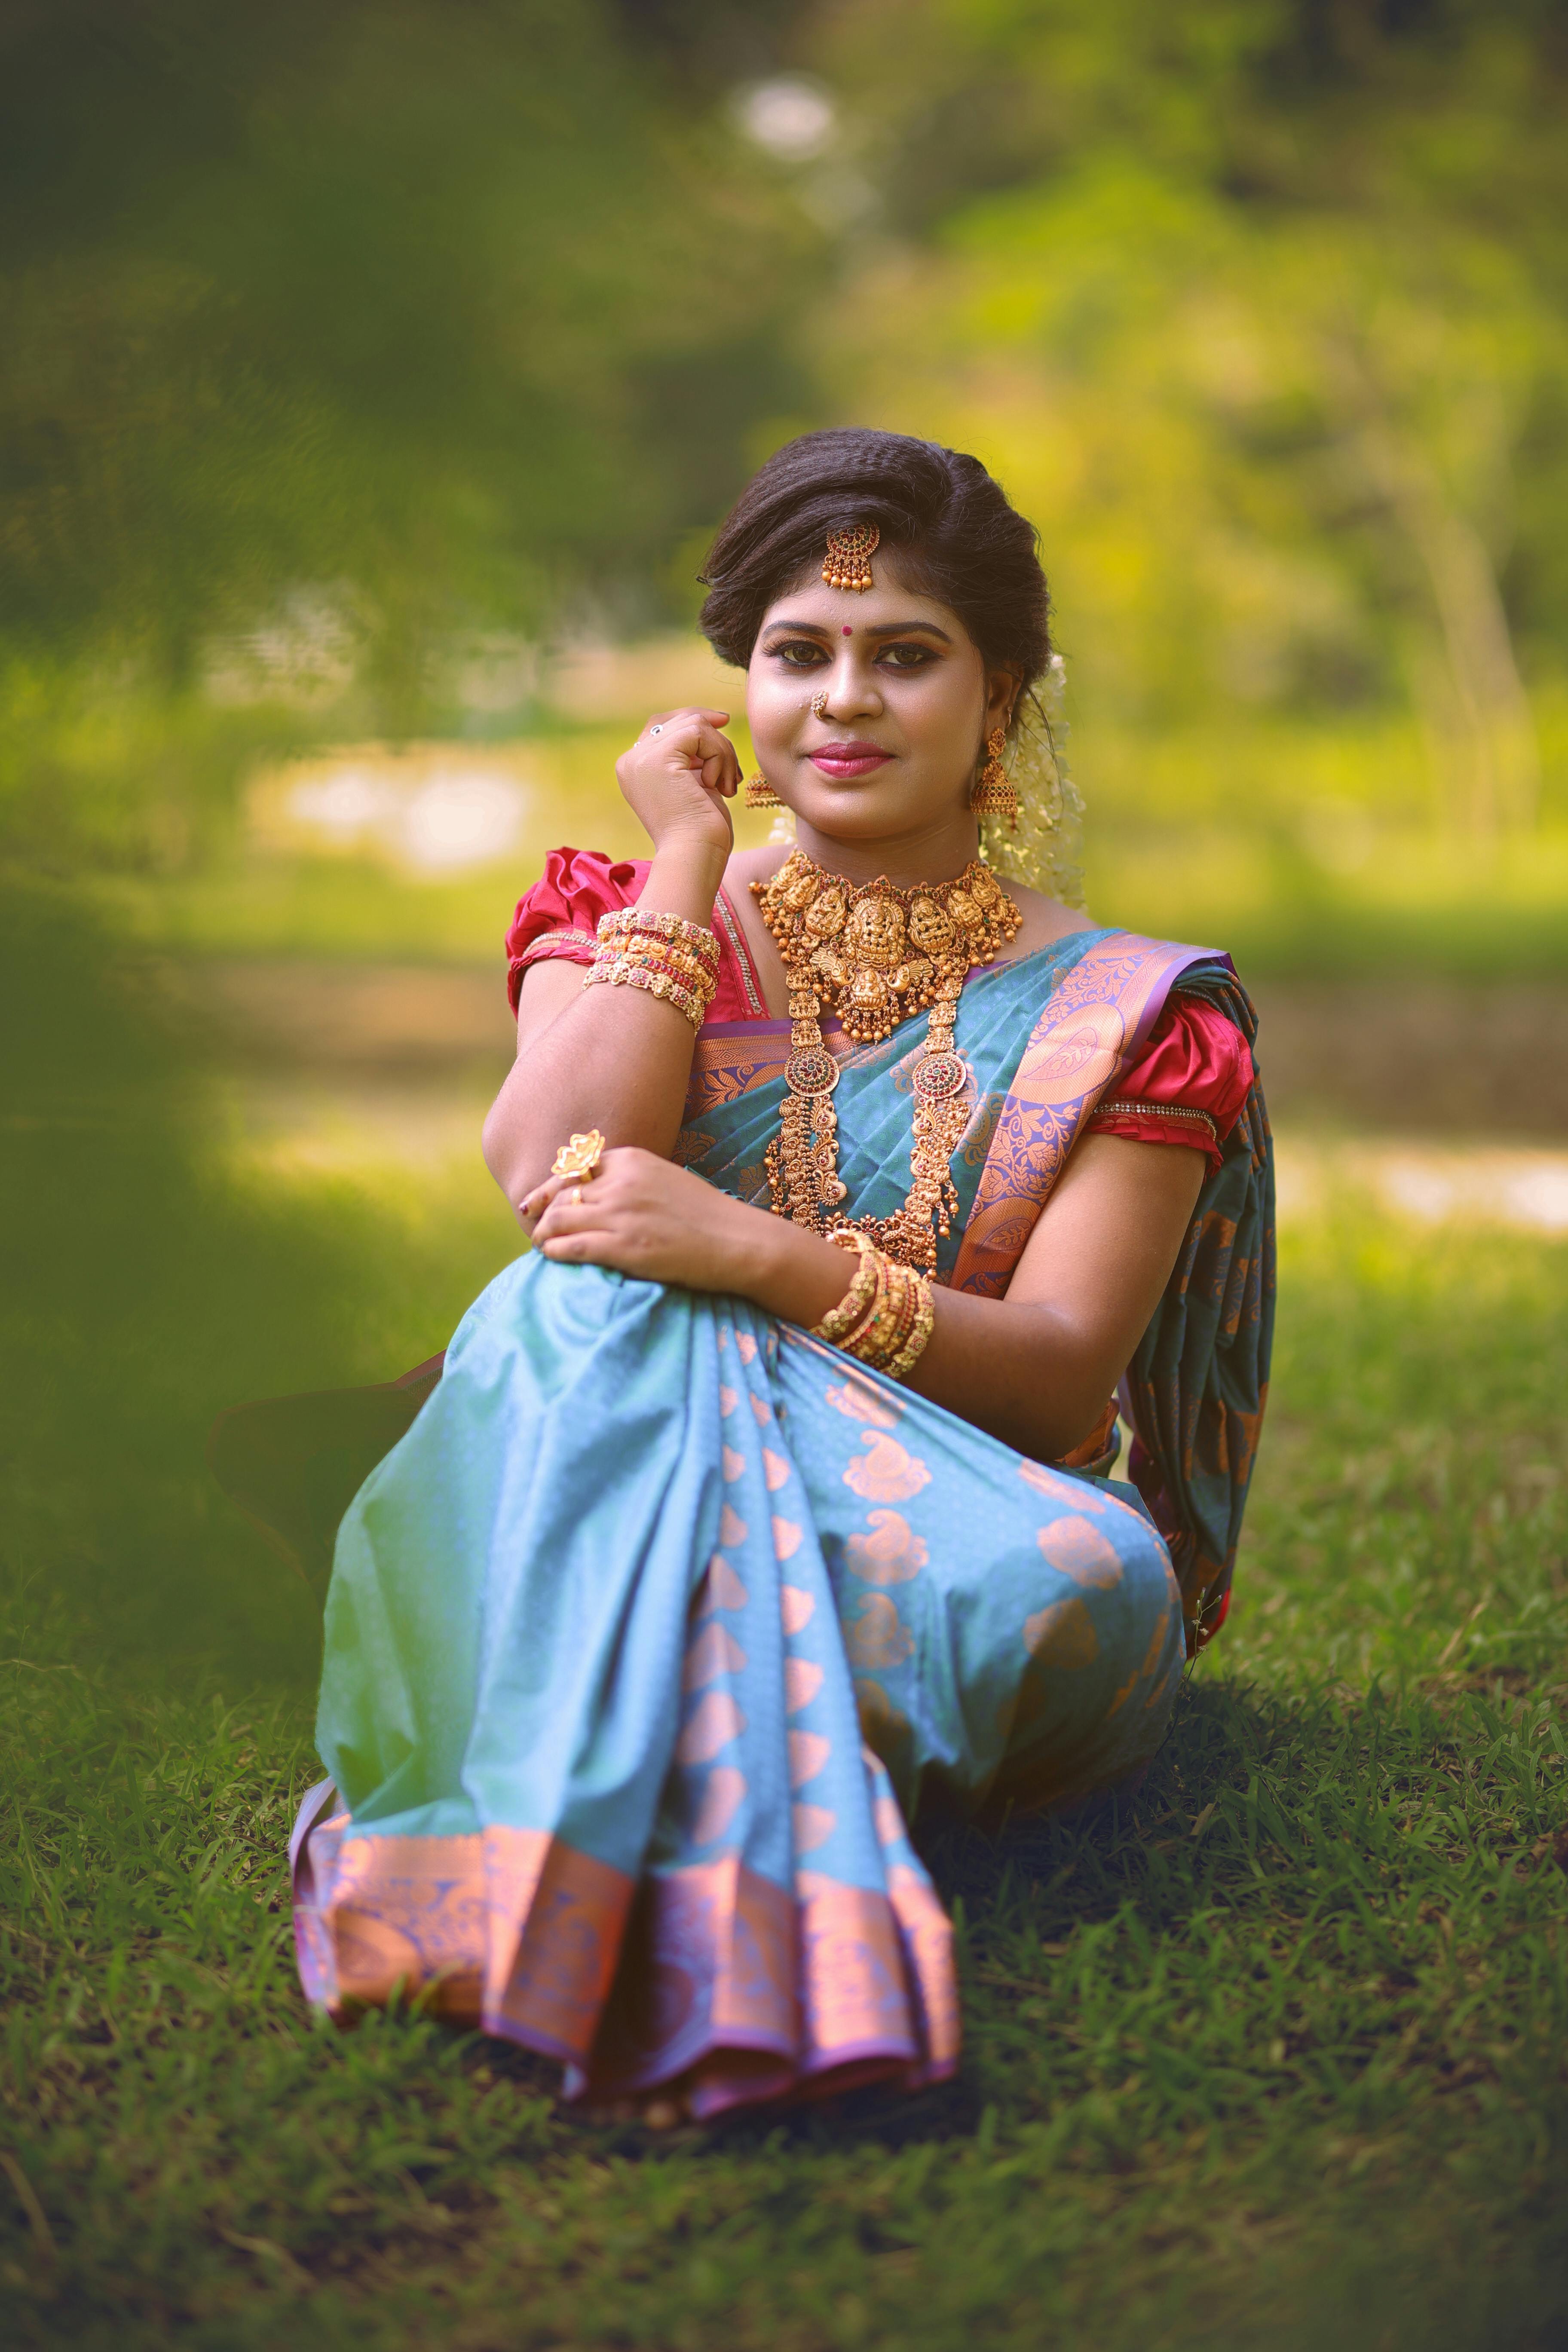 free photo of young woman in a colorful saree dress and jewelry sitting on the grass